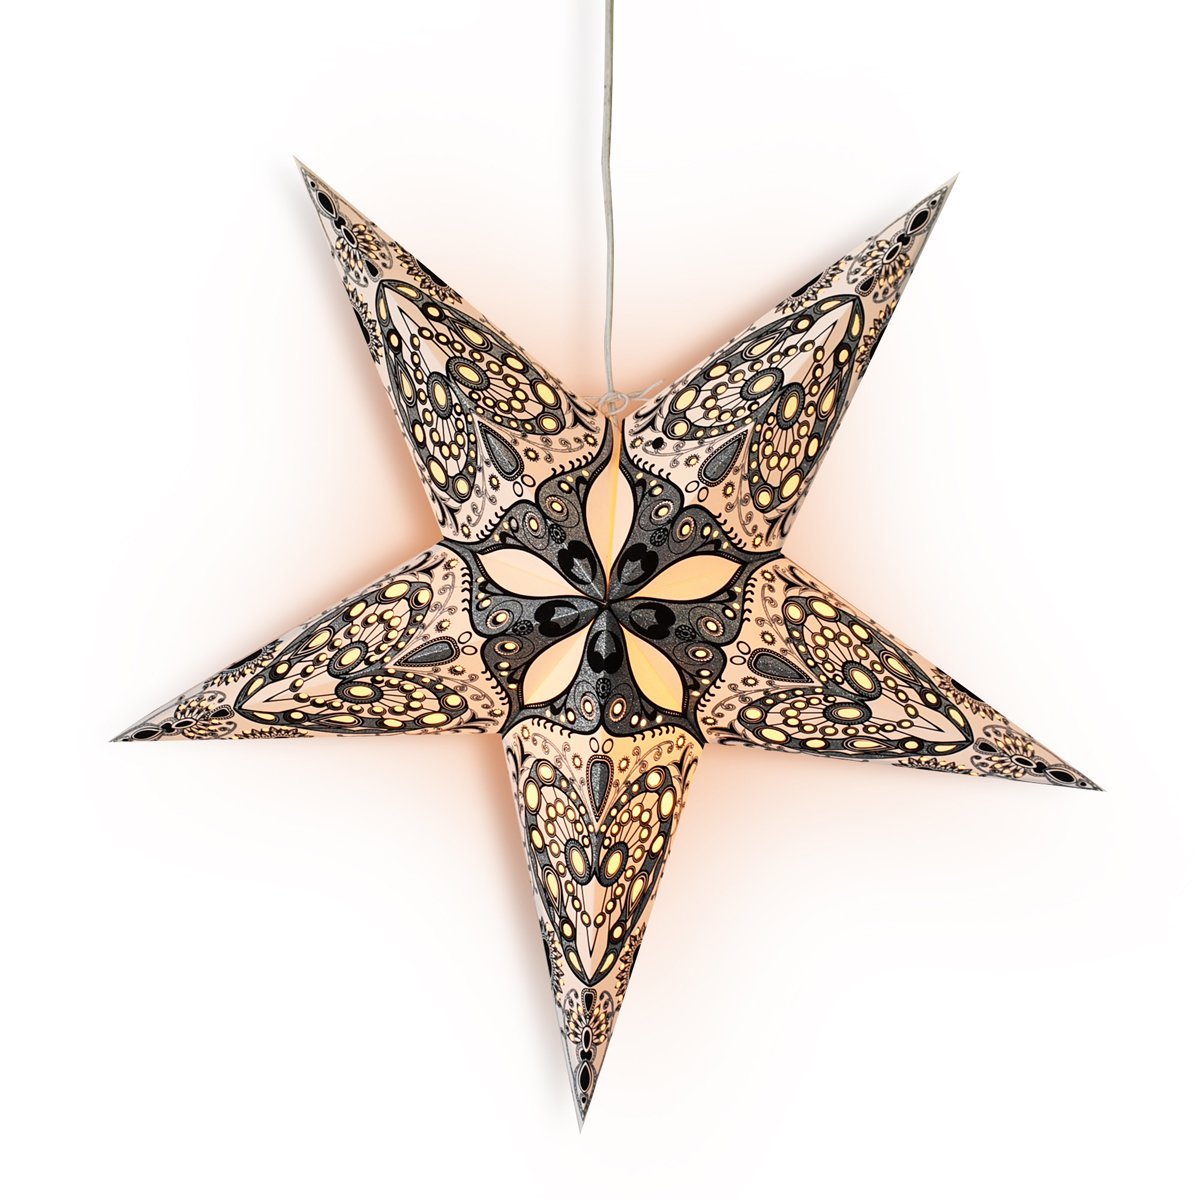 24&quot; White Victoria Glitter Paper Star Lantern, Hanging Wedding &amp; Party Decoration - PaperLanternStore.com - Paper Lanterns, Decor, Party Lights &amp; More